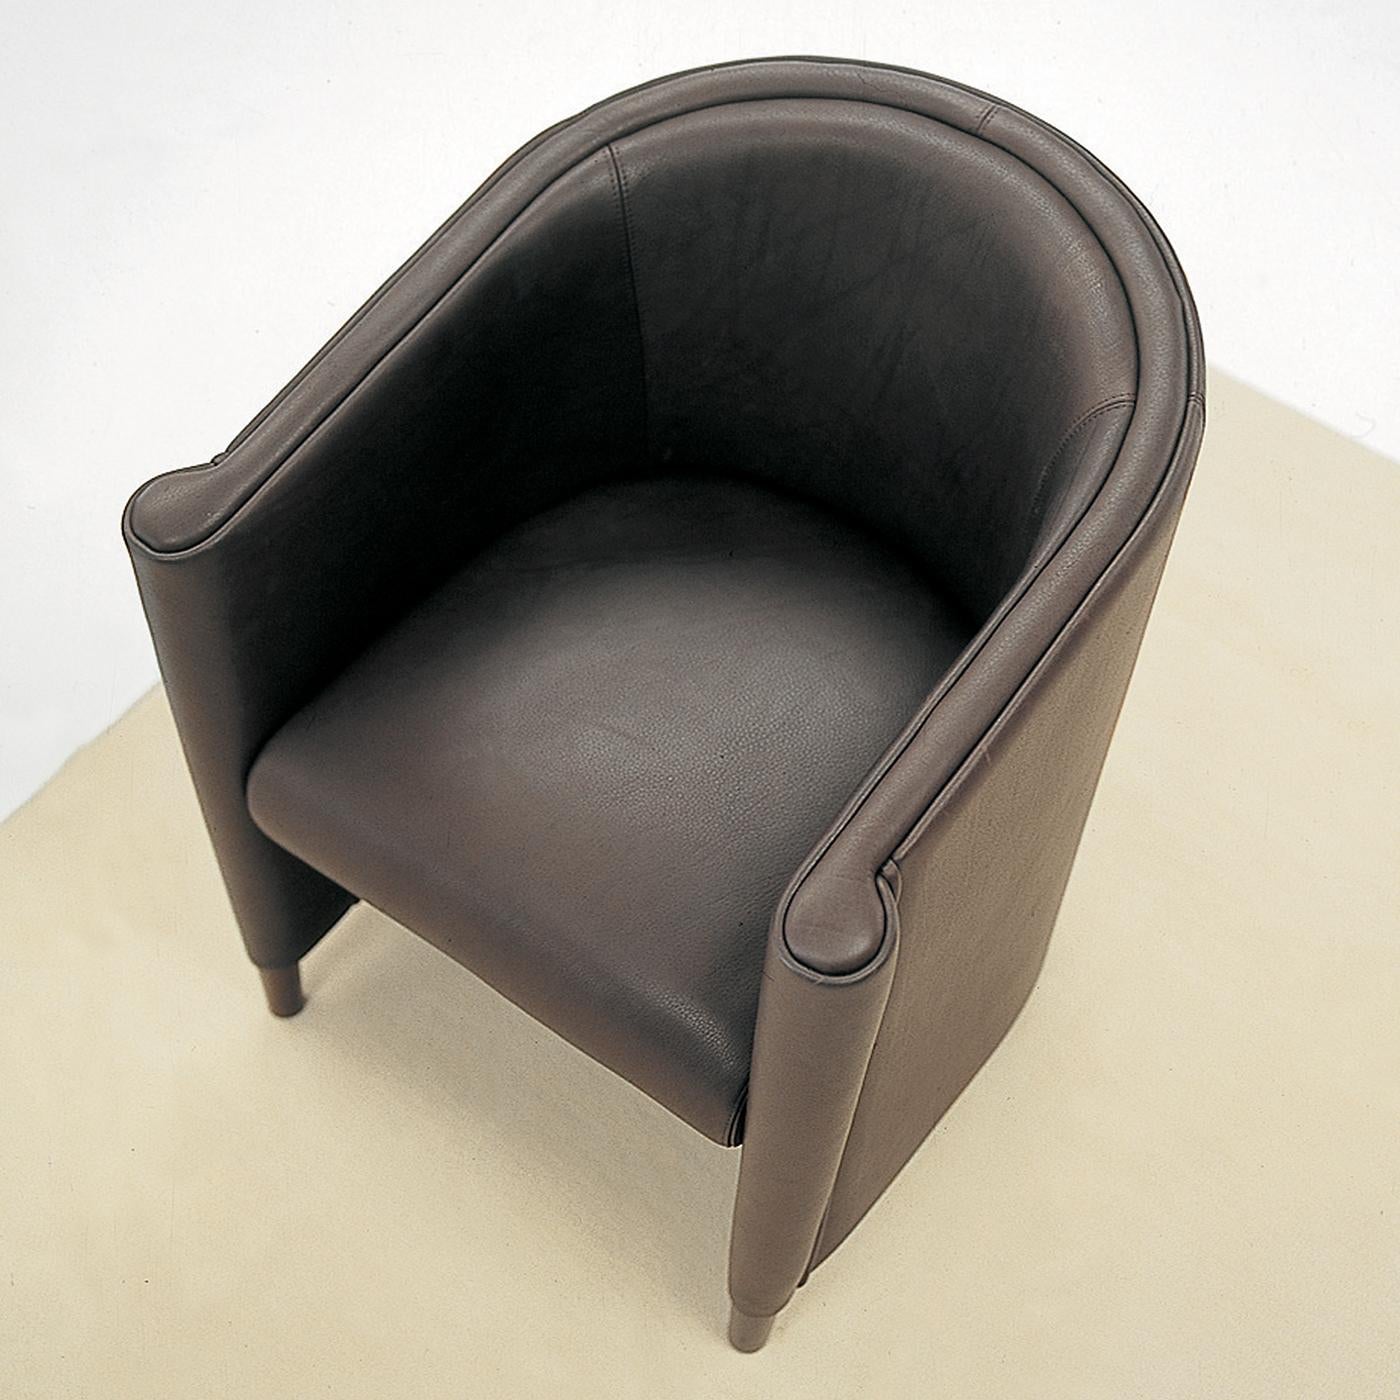 This dark-brown leather armchair is both sleek and cozy. Its enveloping, wraparound structure is like a cocooning nest, while its Minimalist shape is comprised of rounded forms and straight lines, creating a geometric structure that exudes personal